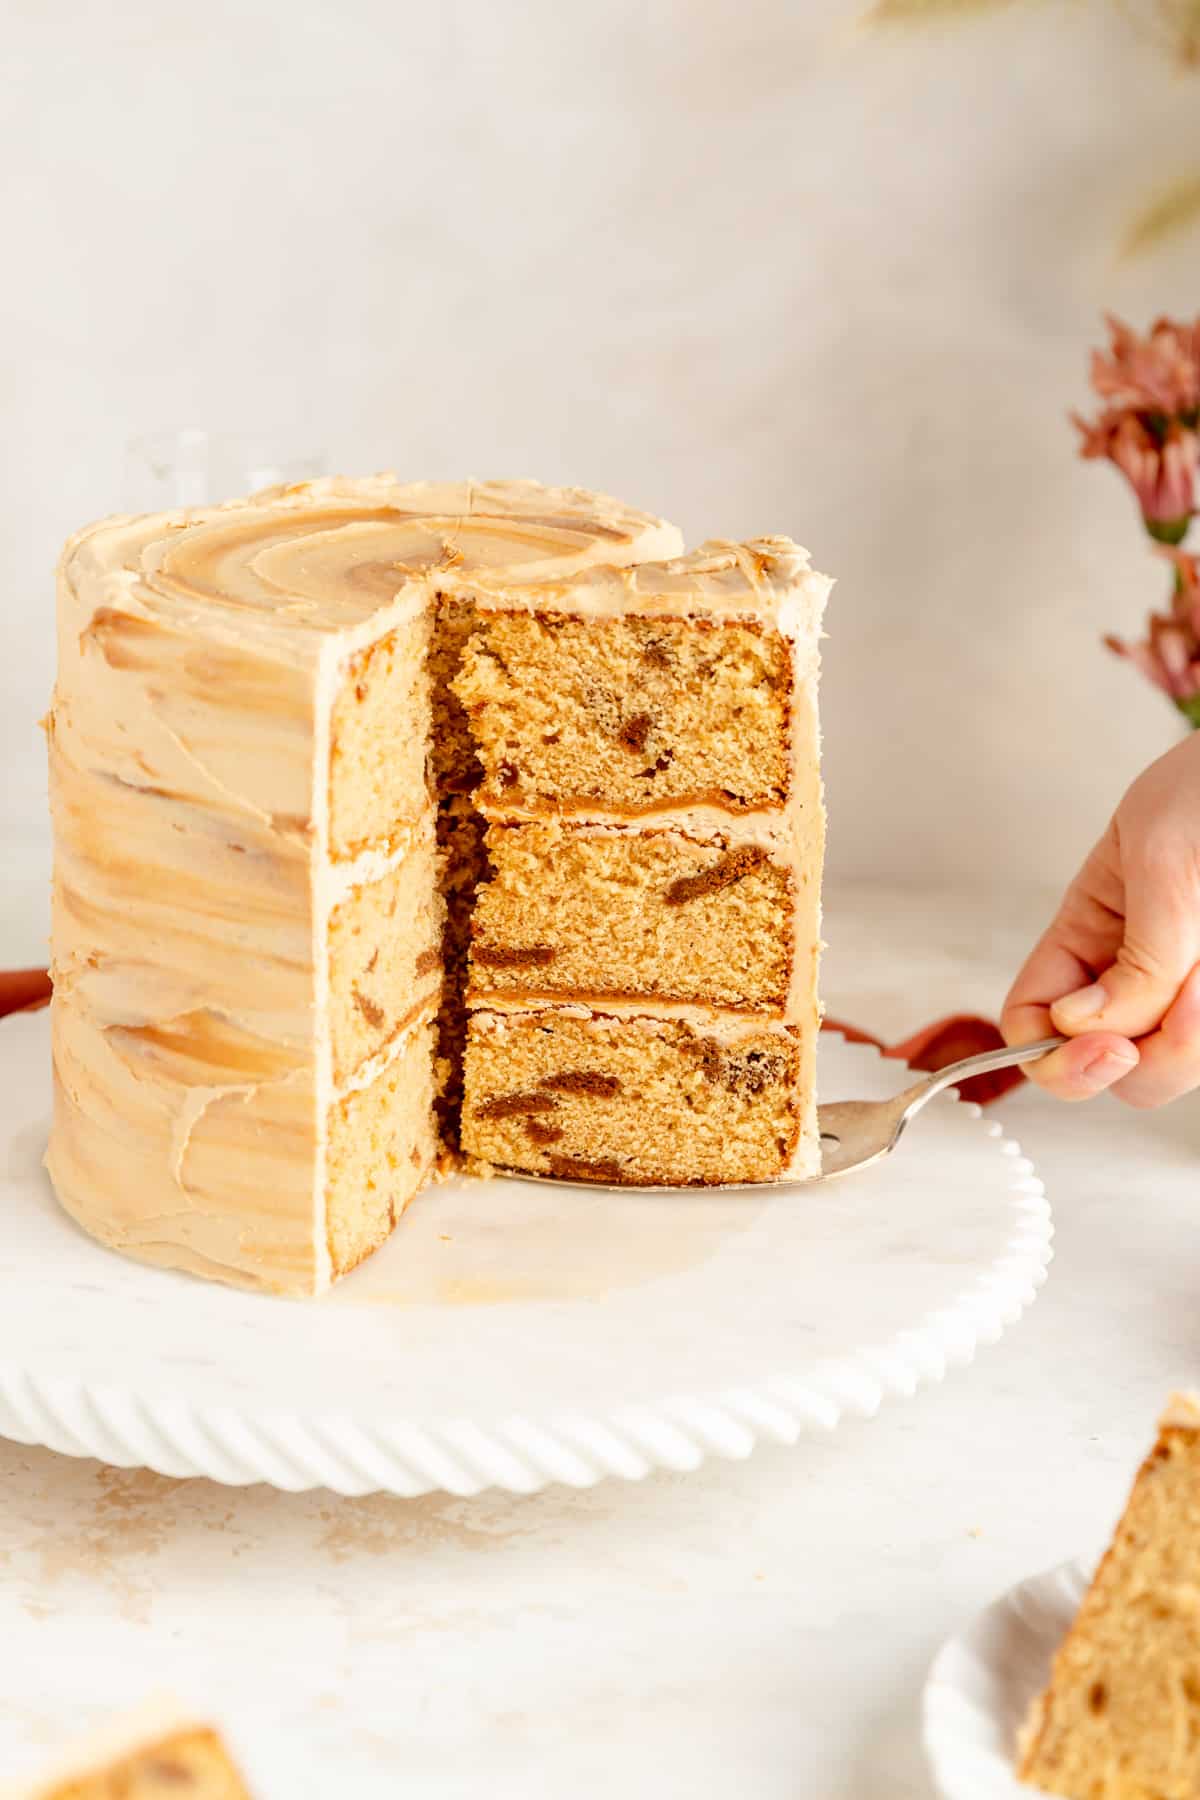 Hand using silver cake server to remove a slice of cookie butter cake from full cake.